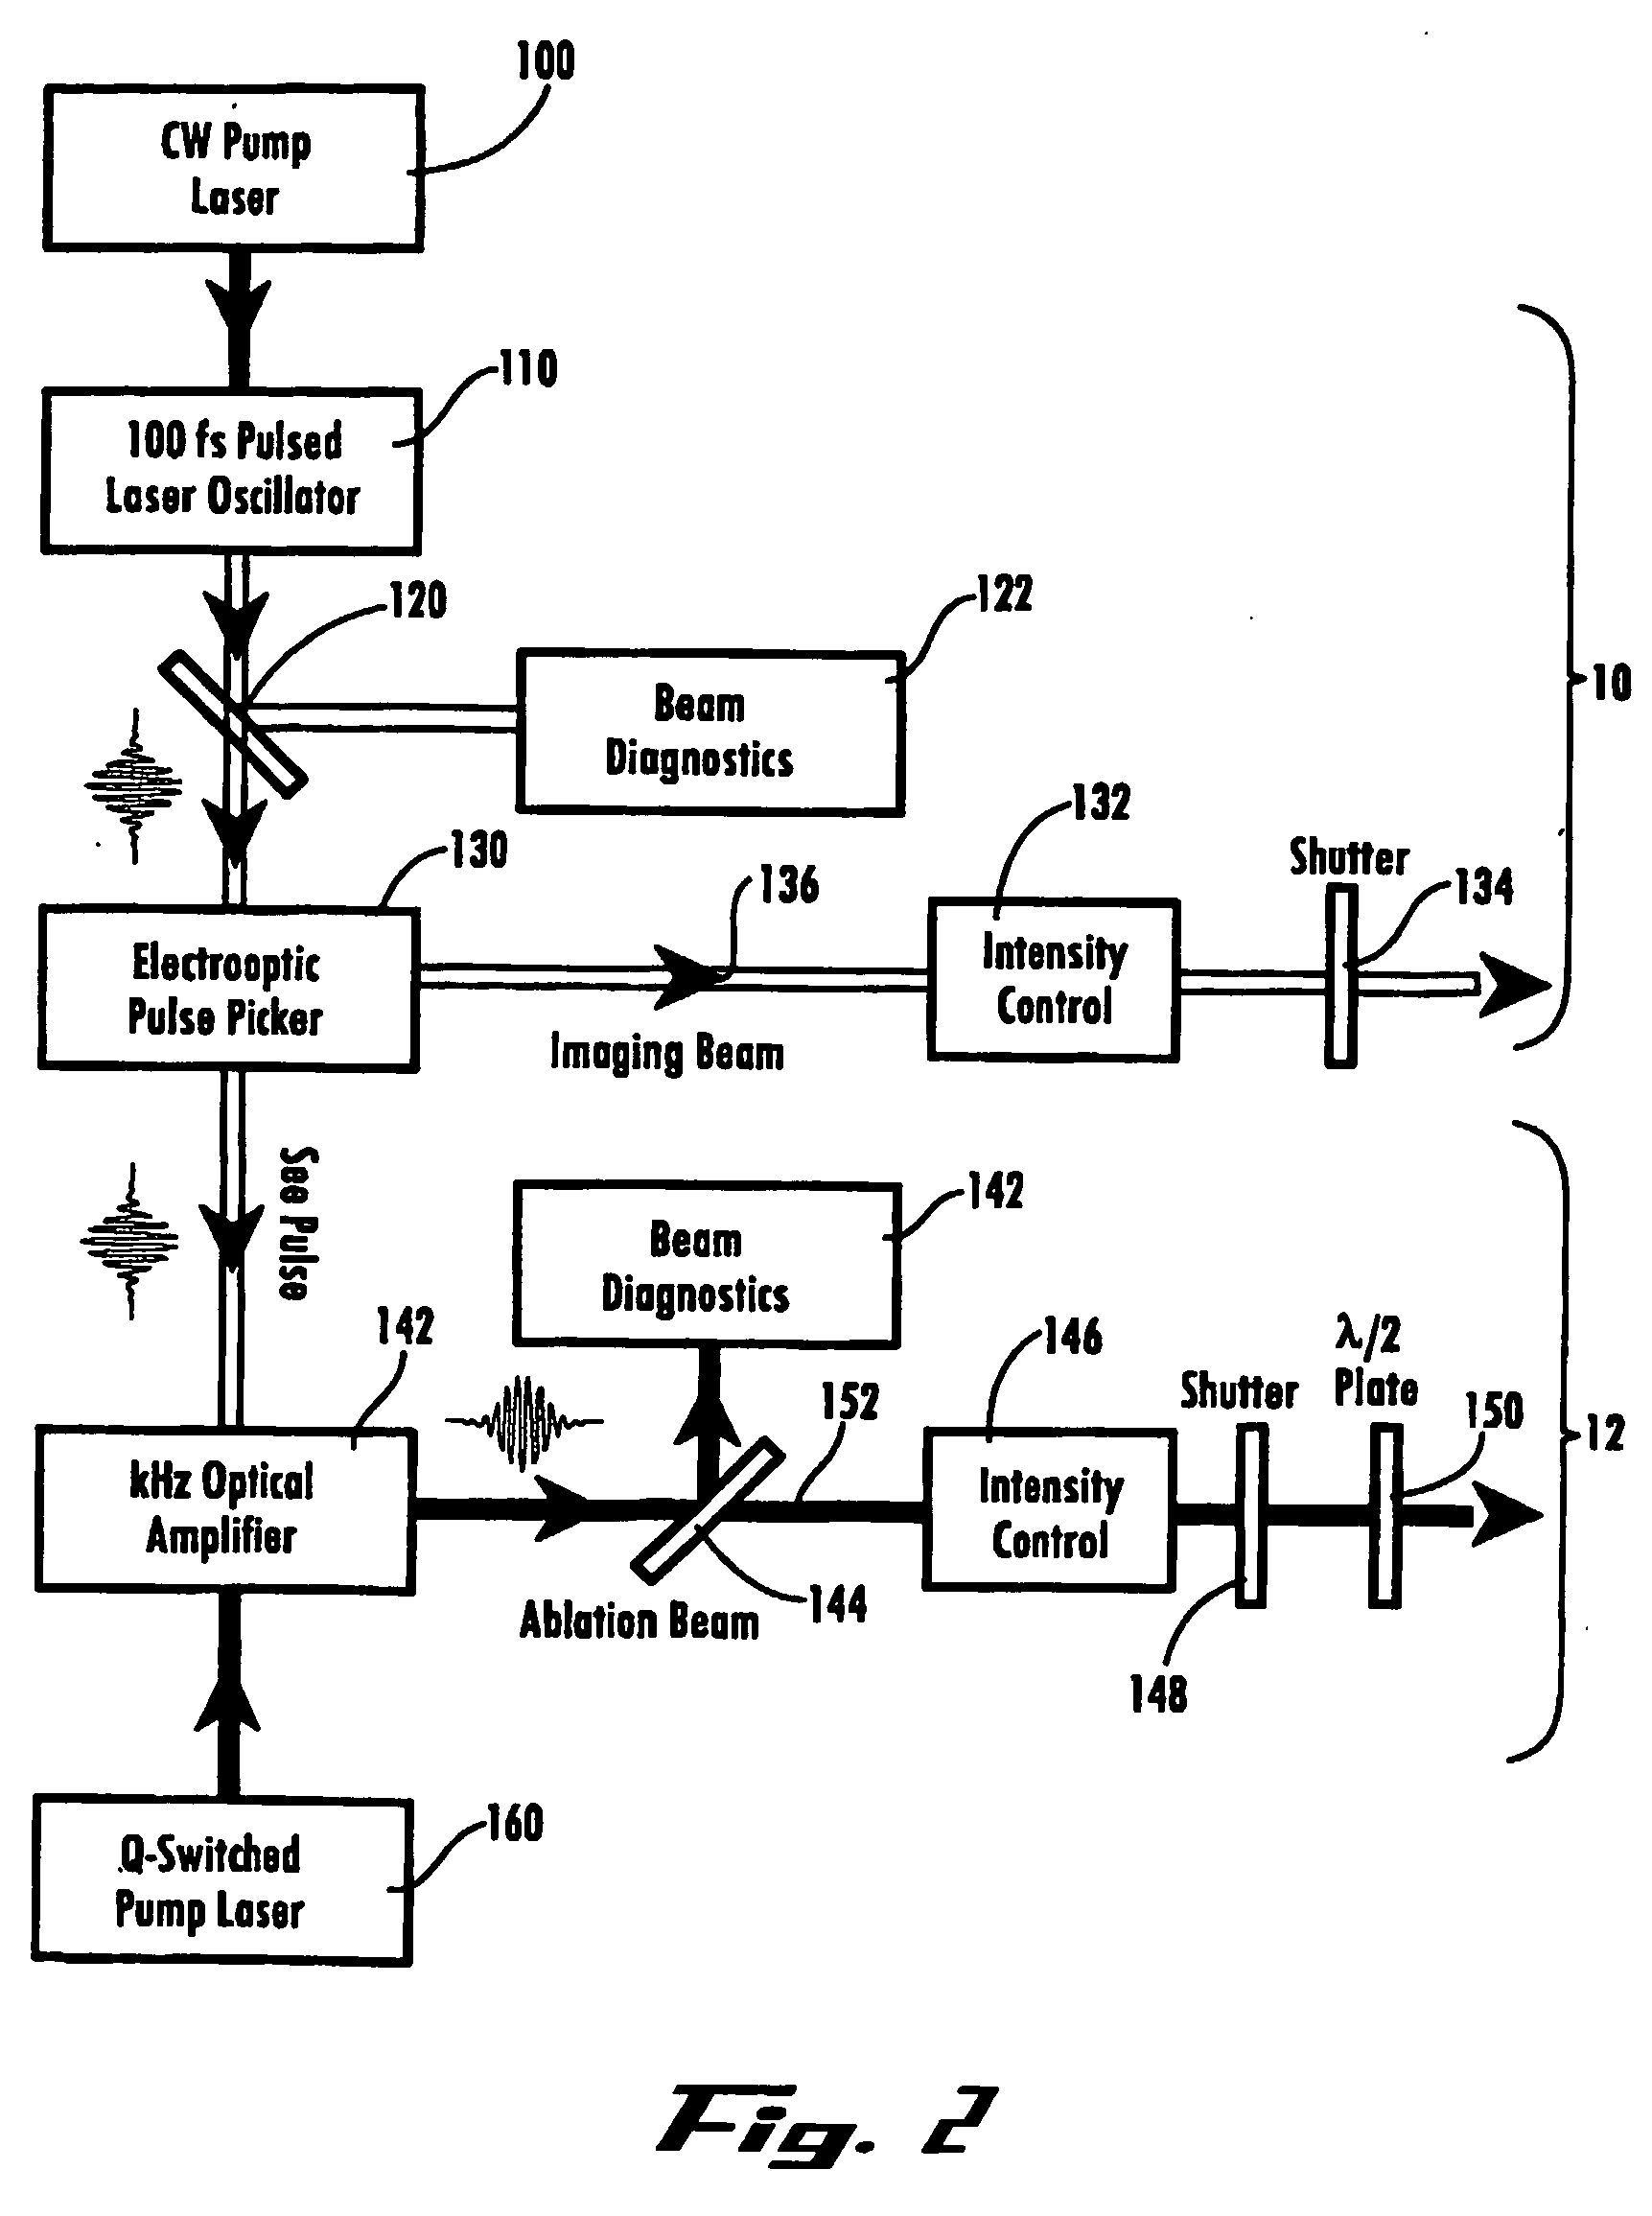 Device and method for inducing vascular injury and/or blockage in an animal model